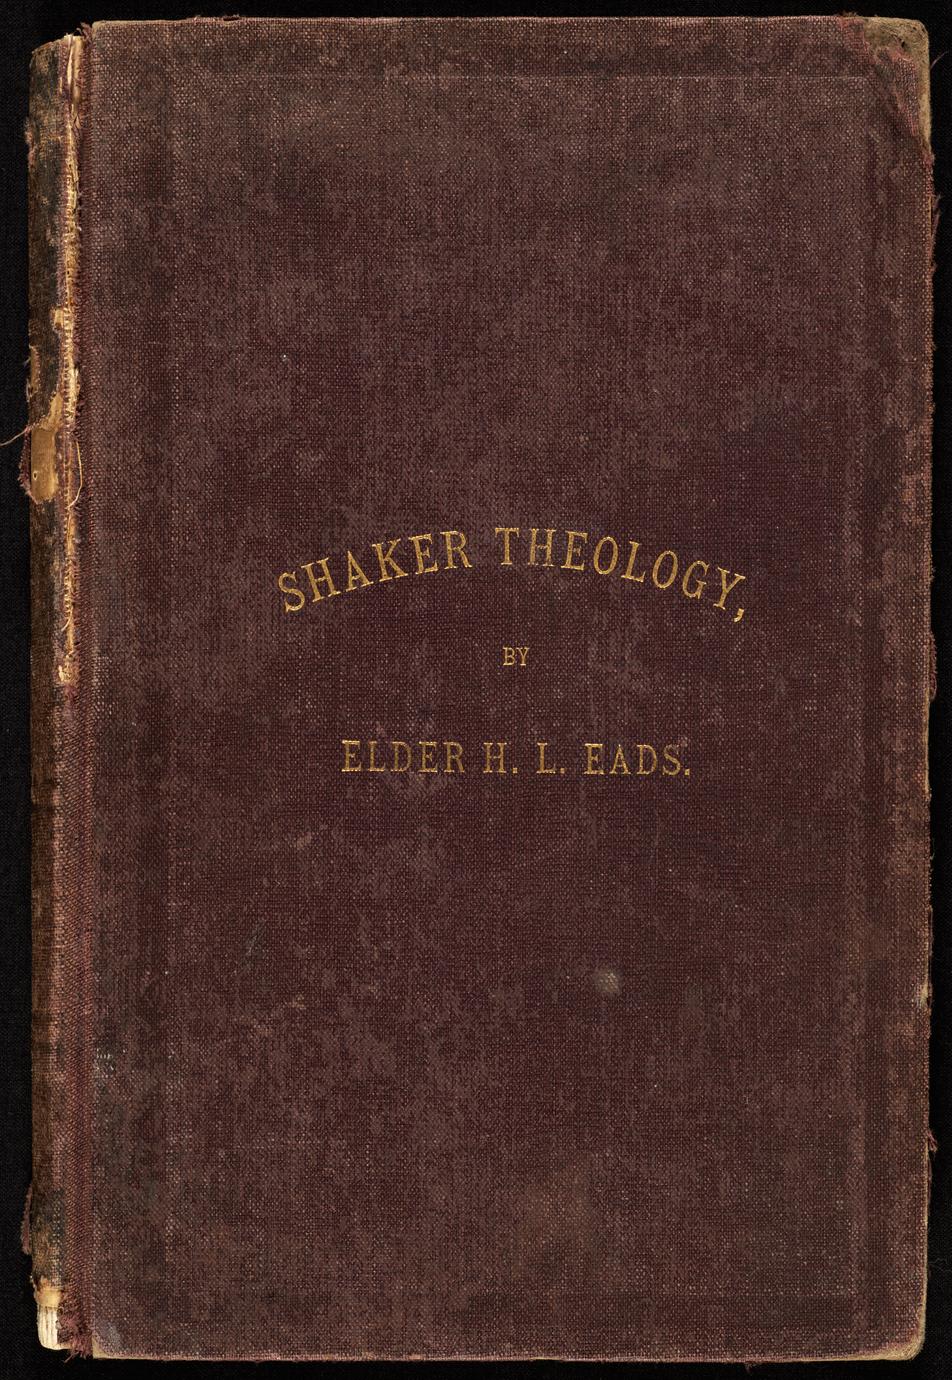 Shaker sermons, scripto-rational : containing the substance of Shaker theology : together with replies and criticisms logically and clearly set forth (1 of 2)